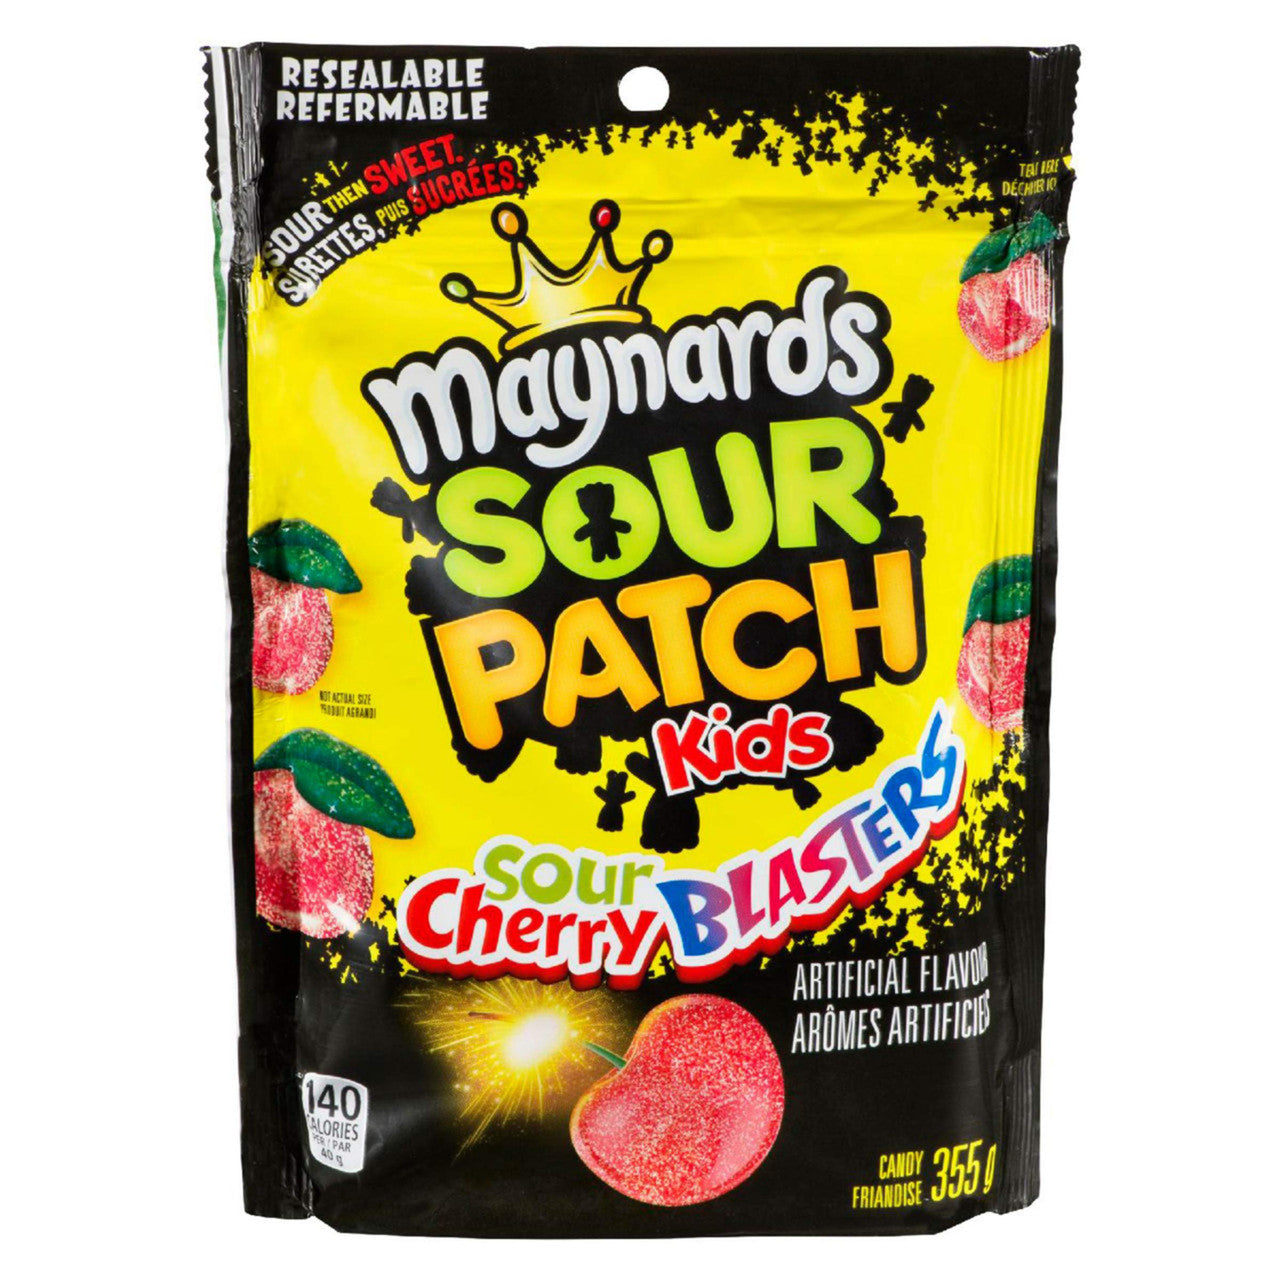 Maynards Sour Cherry Blasters Candy, 355g/12.52oz {Imported from Canada}